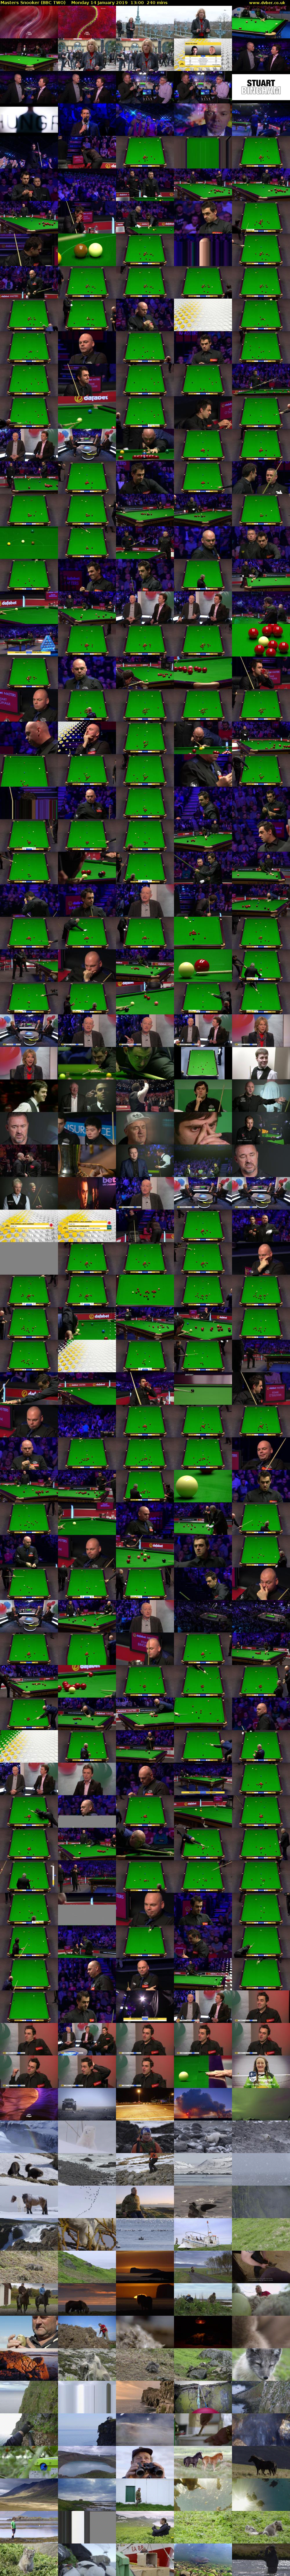 Masters Snooker (BBC TWO) Monday 14 January 2019 13:00 - 17:00